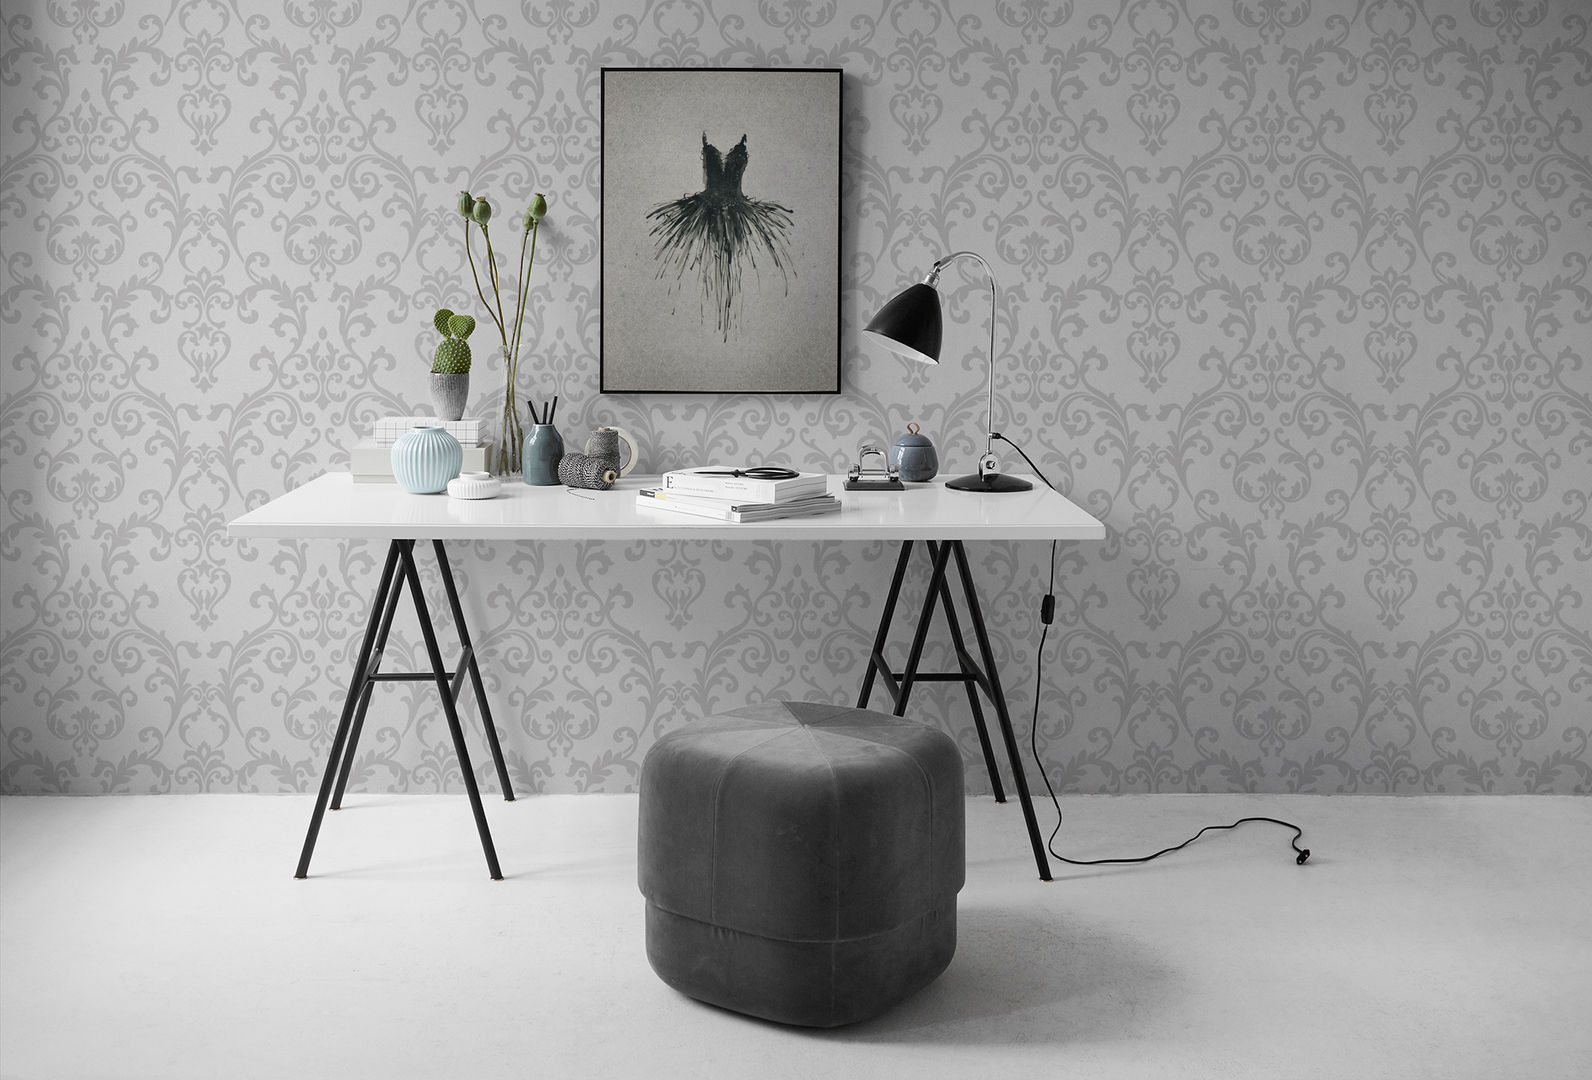 Classical Ballet Pixers Study/office wall mural,wallpaper,ballet,floral,glamour,pattern